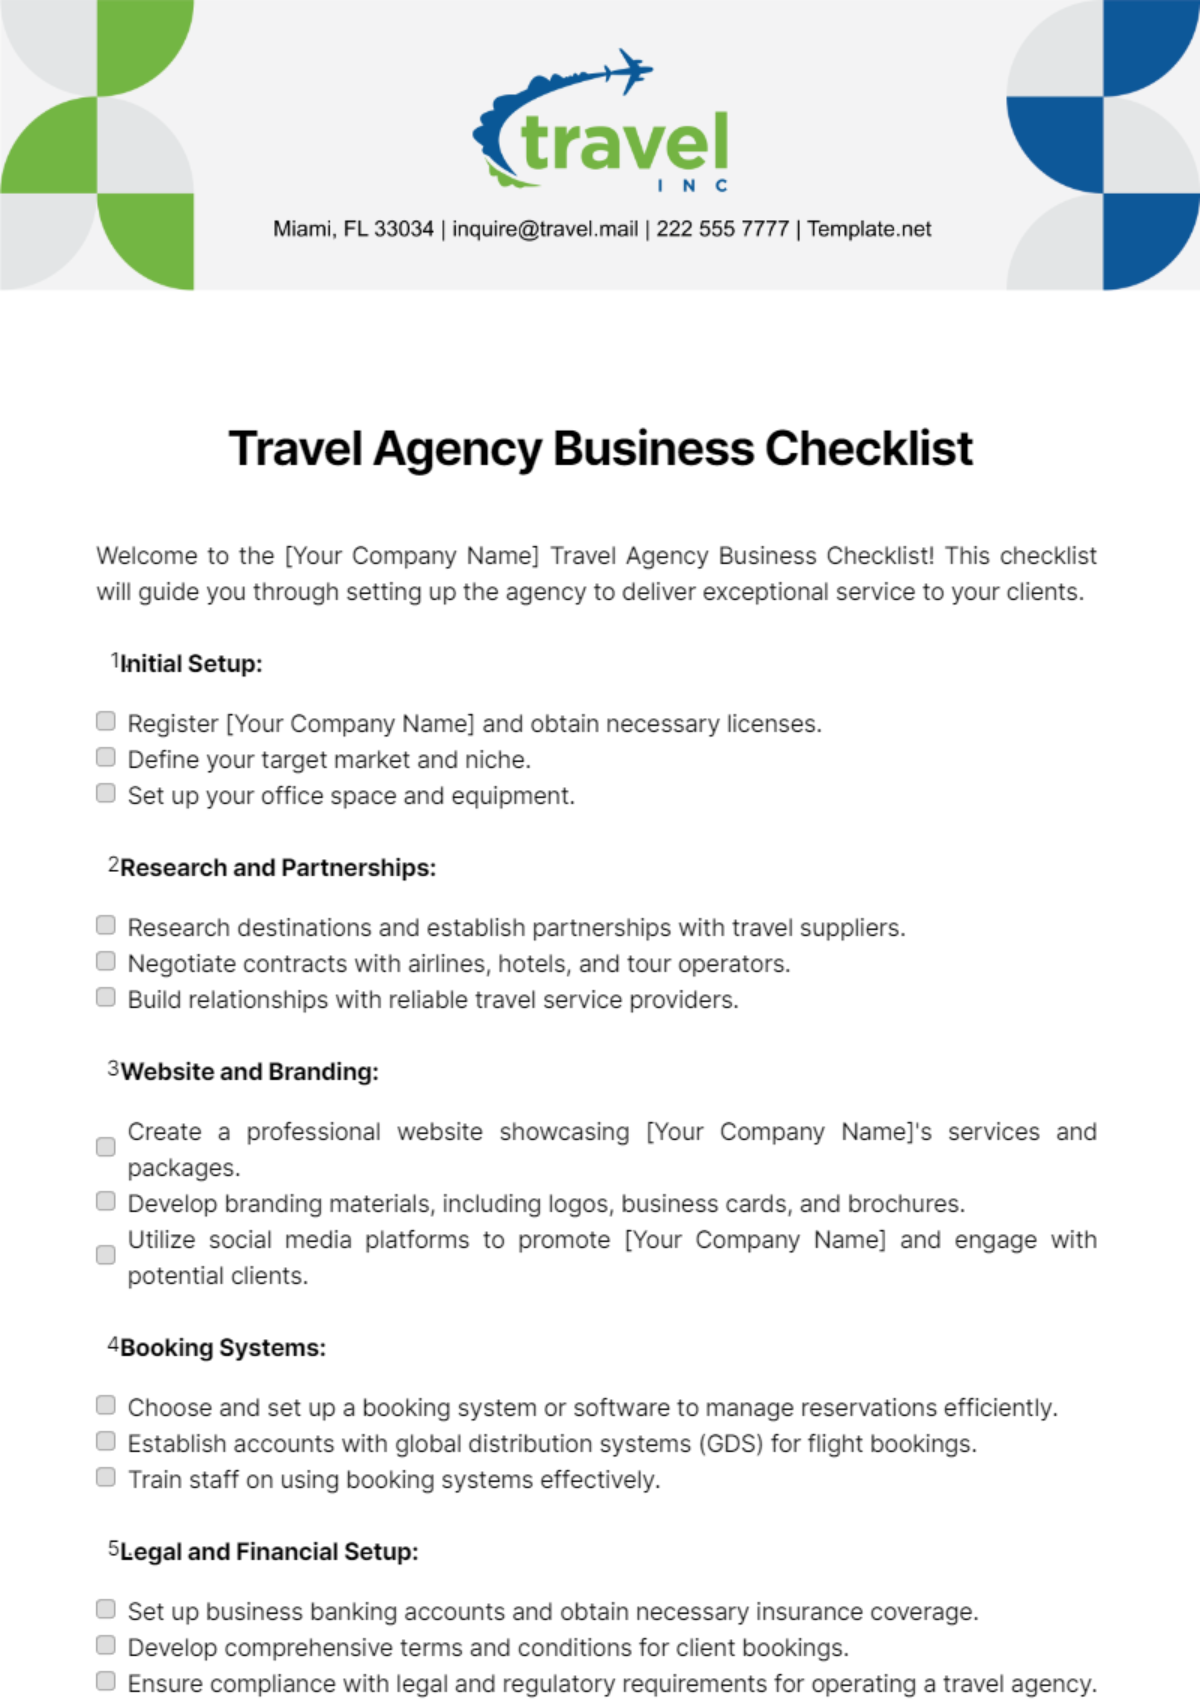 Travel Agency Business Checklist Template